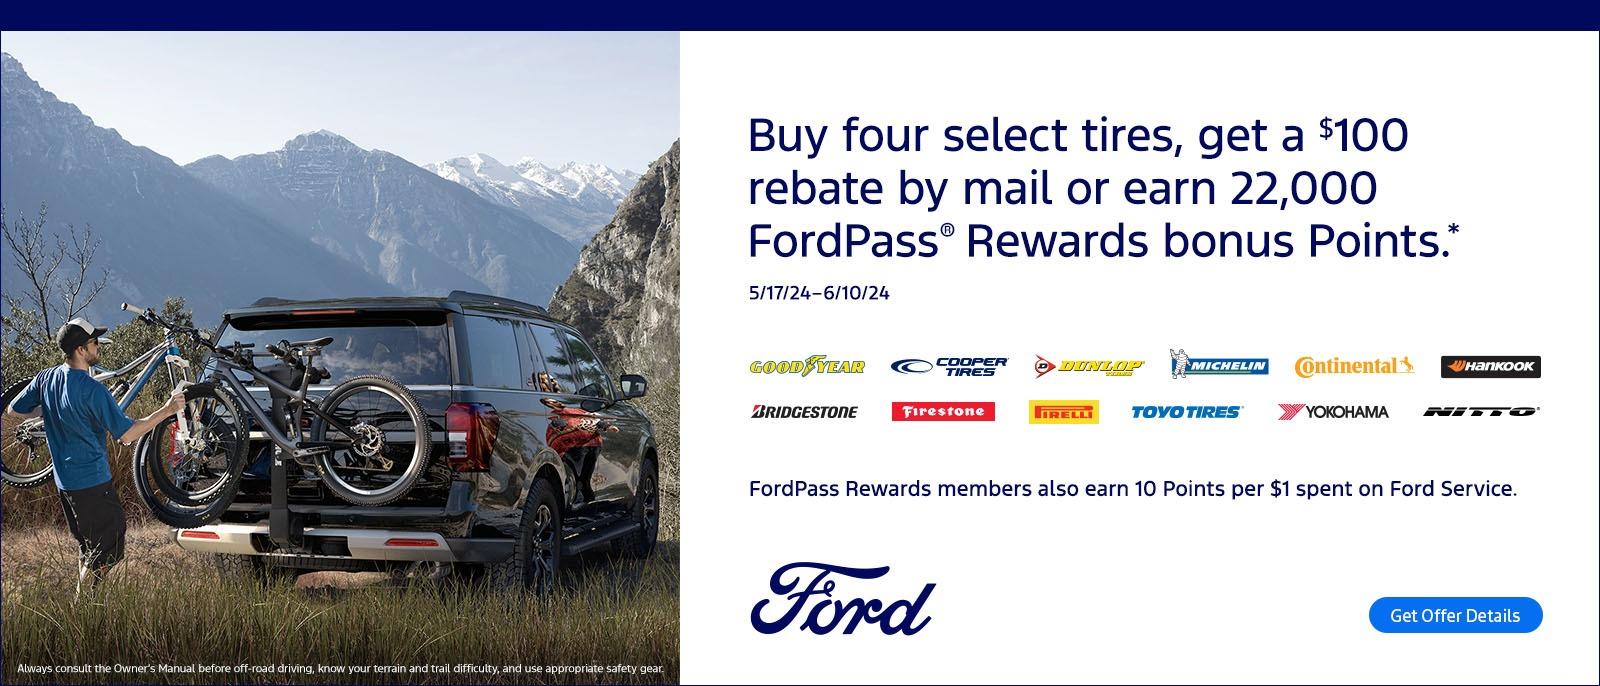 Buy four select tires, get a $100 rebate by mail or earn 22,000 FordPass® Rewards bonus Points.*